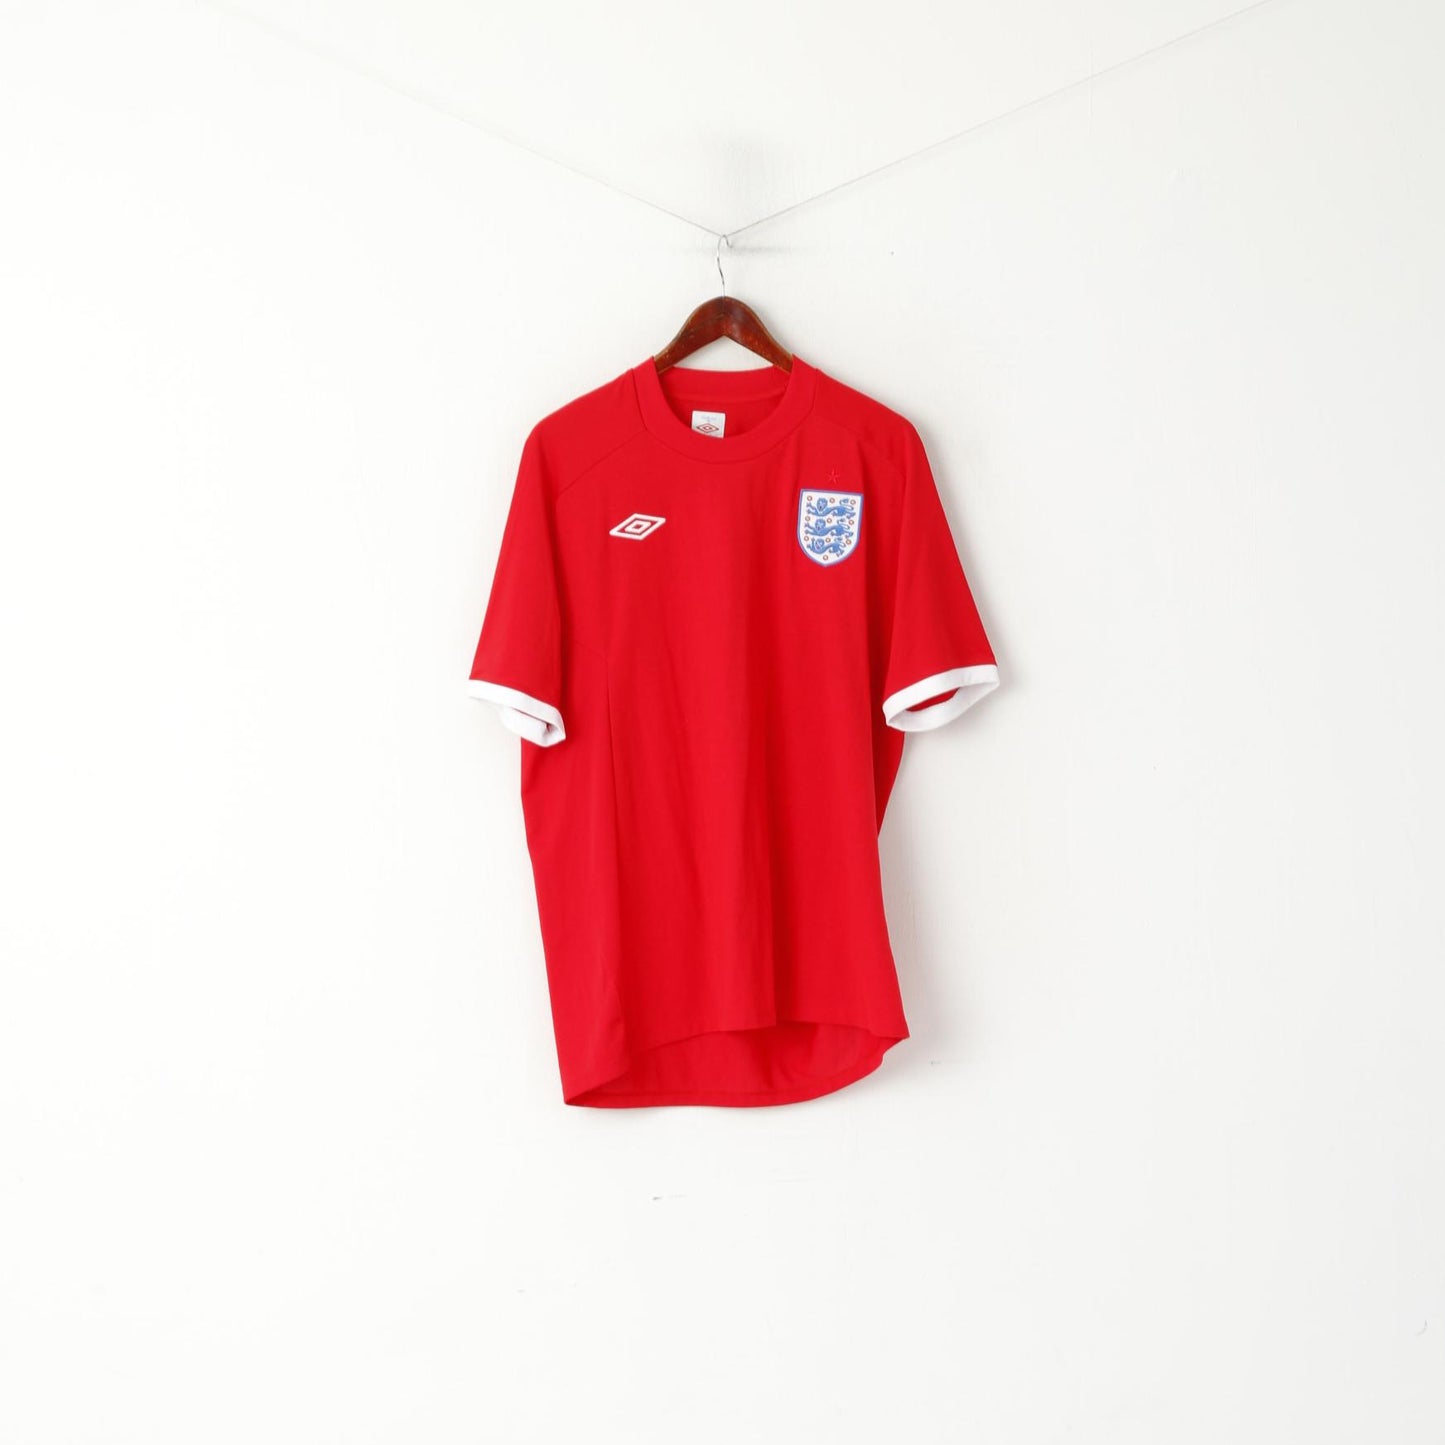 Umbro Hommes 46 L Chemise Rouge National Angleterre Équipe Football Sportswear Jersey